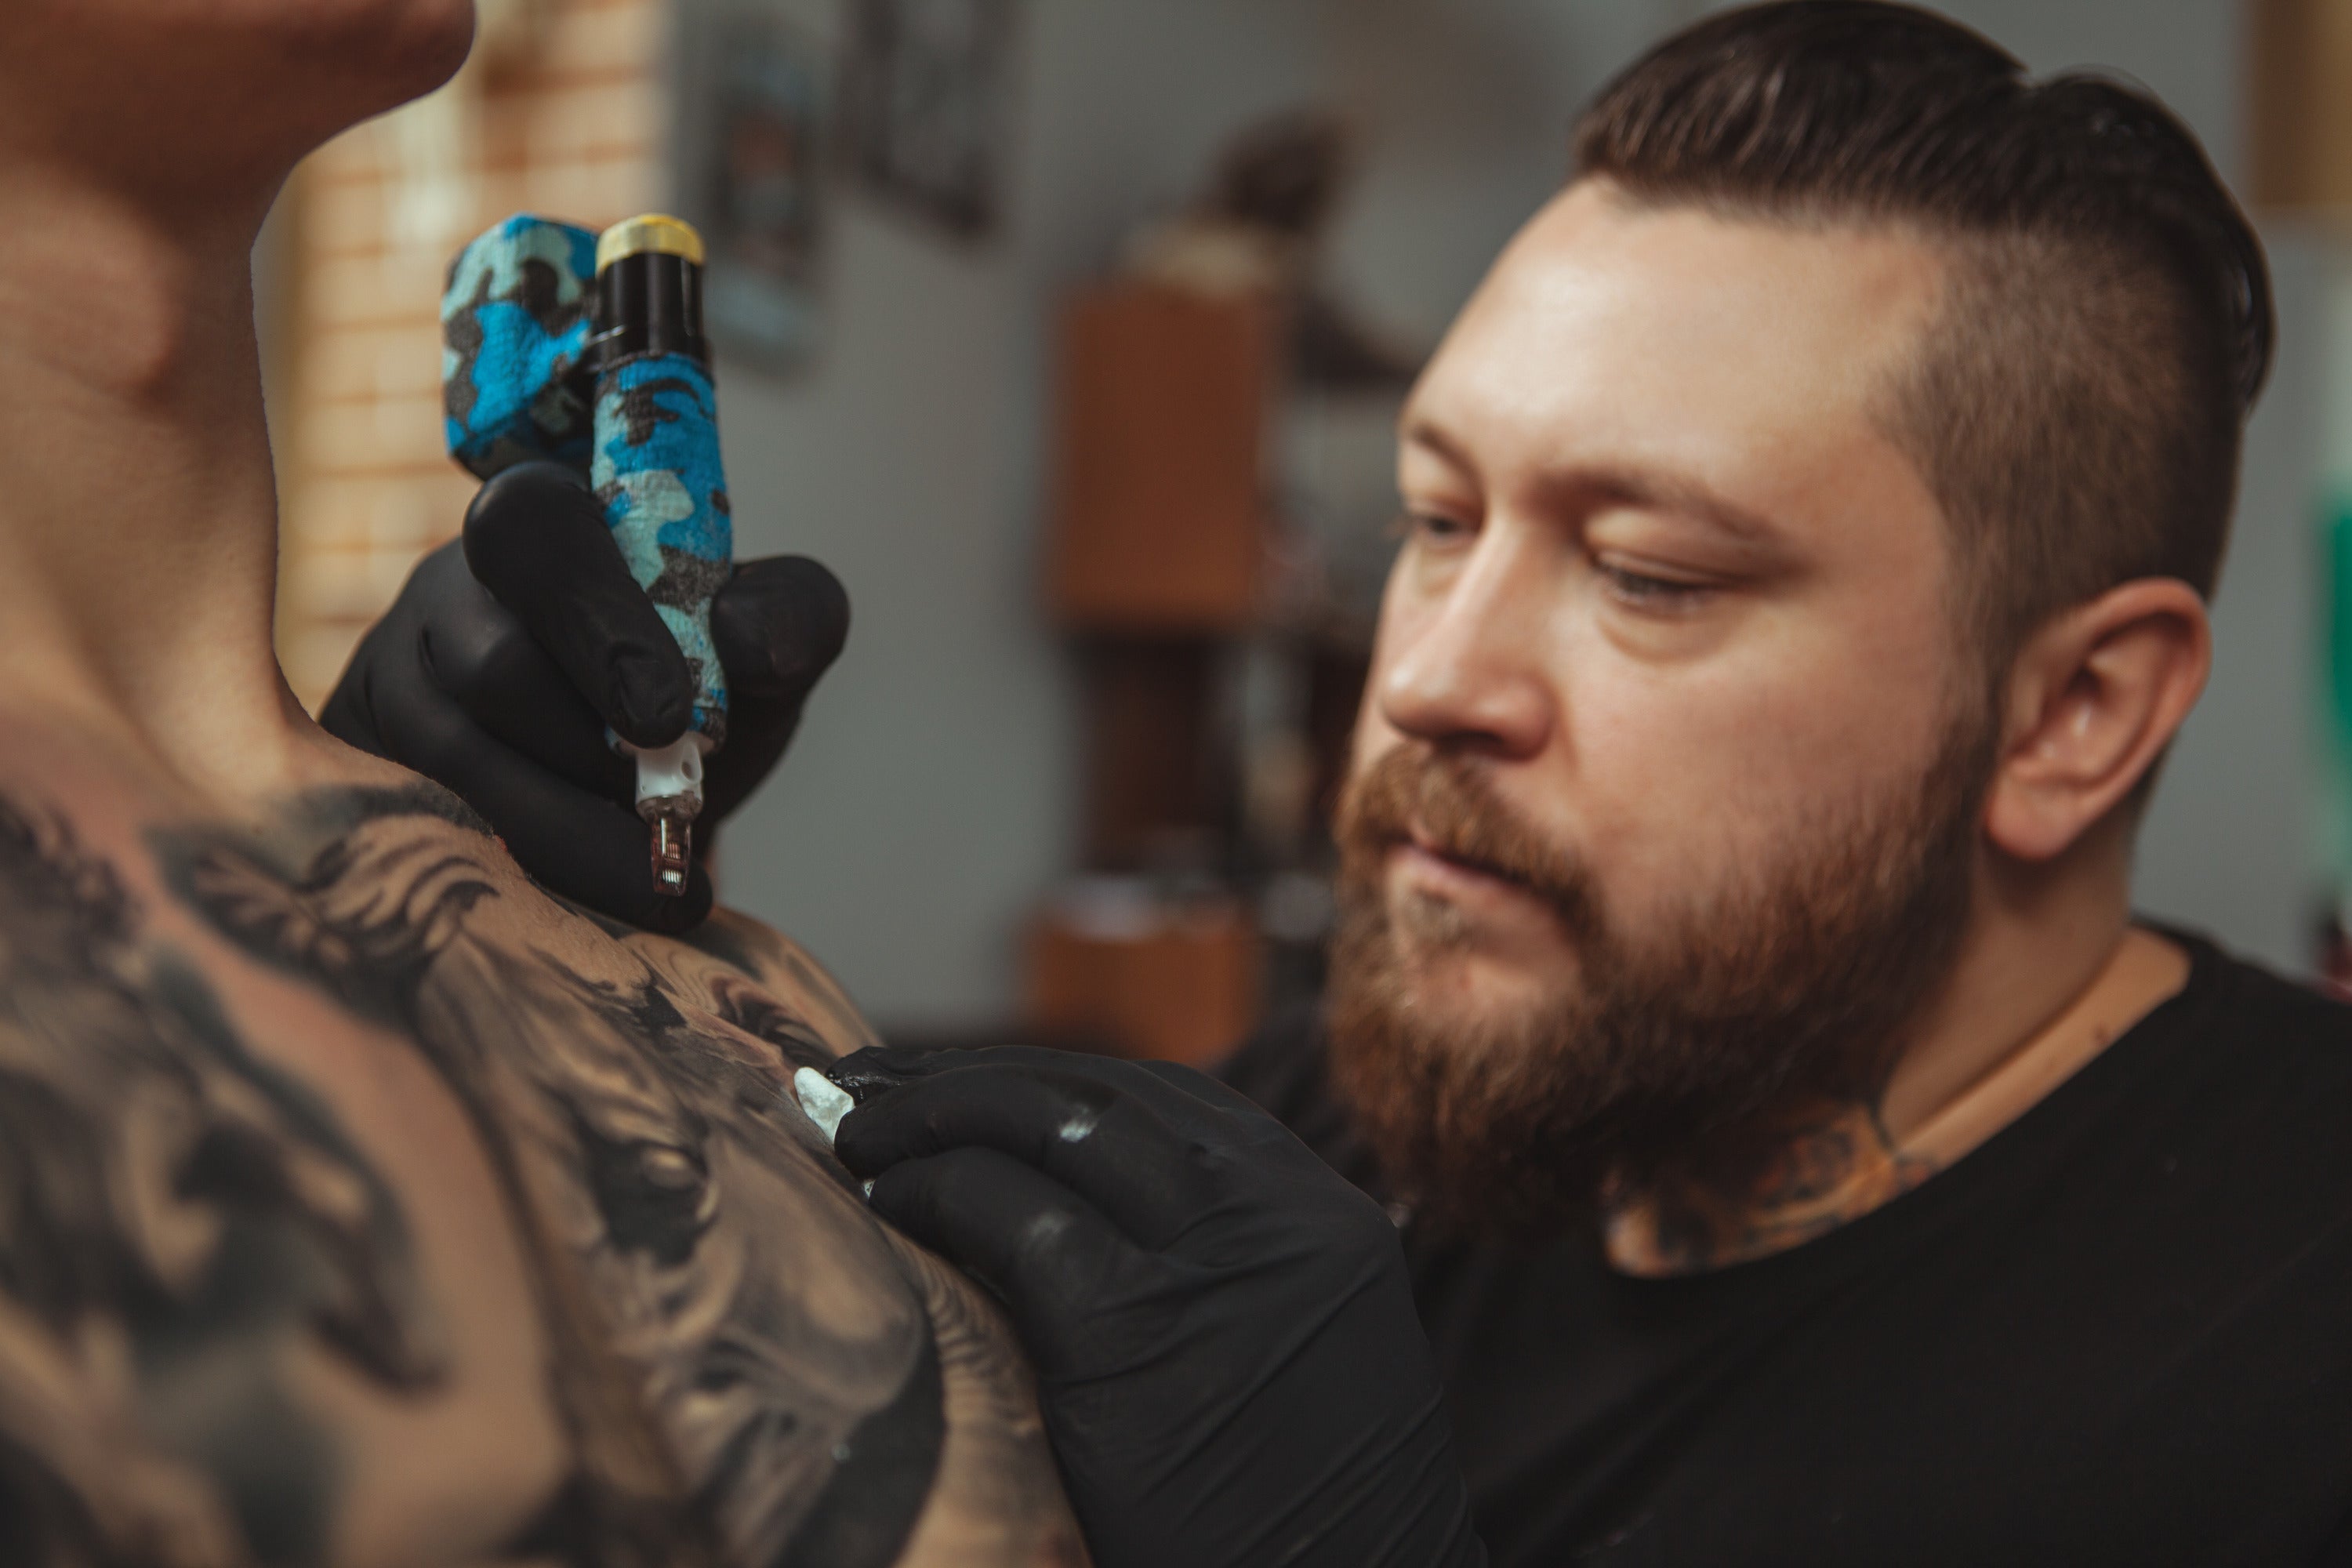 How Painful are Tattoos? – Derm Dude